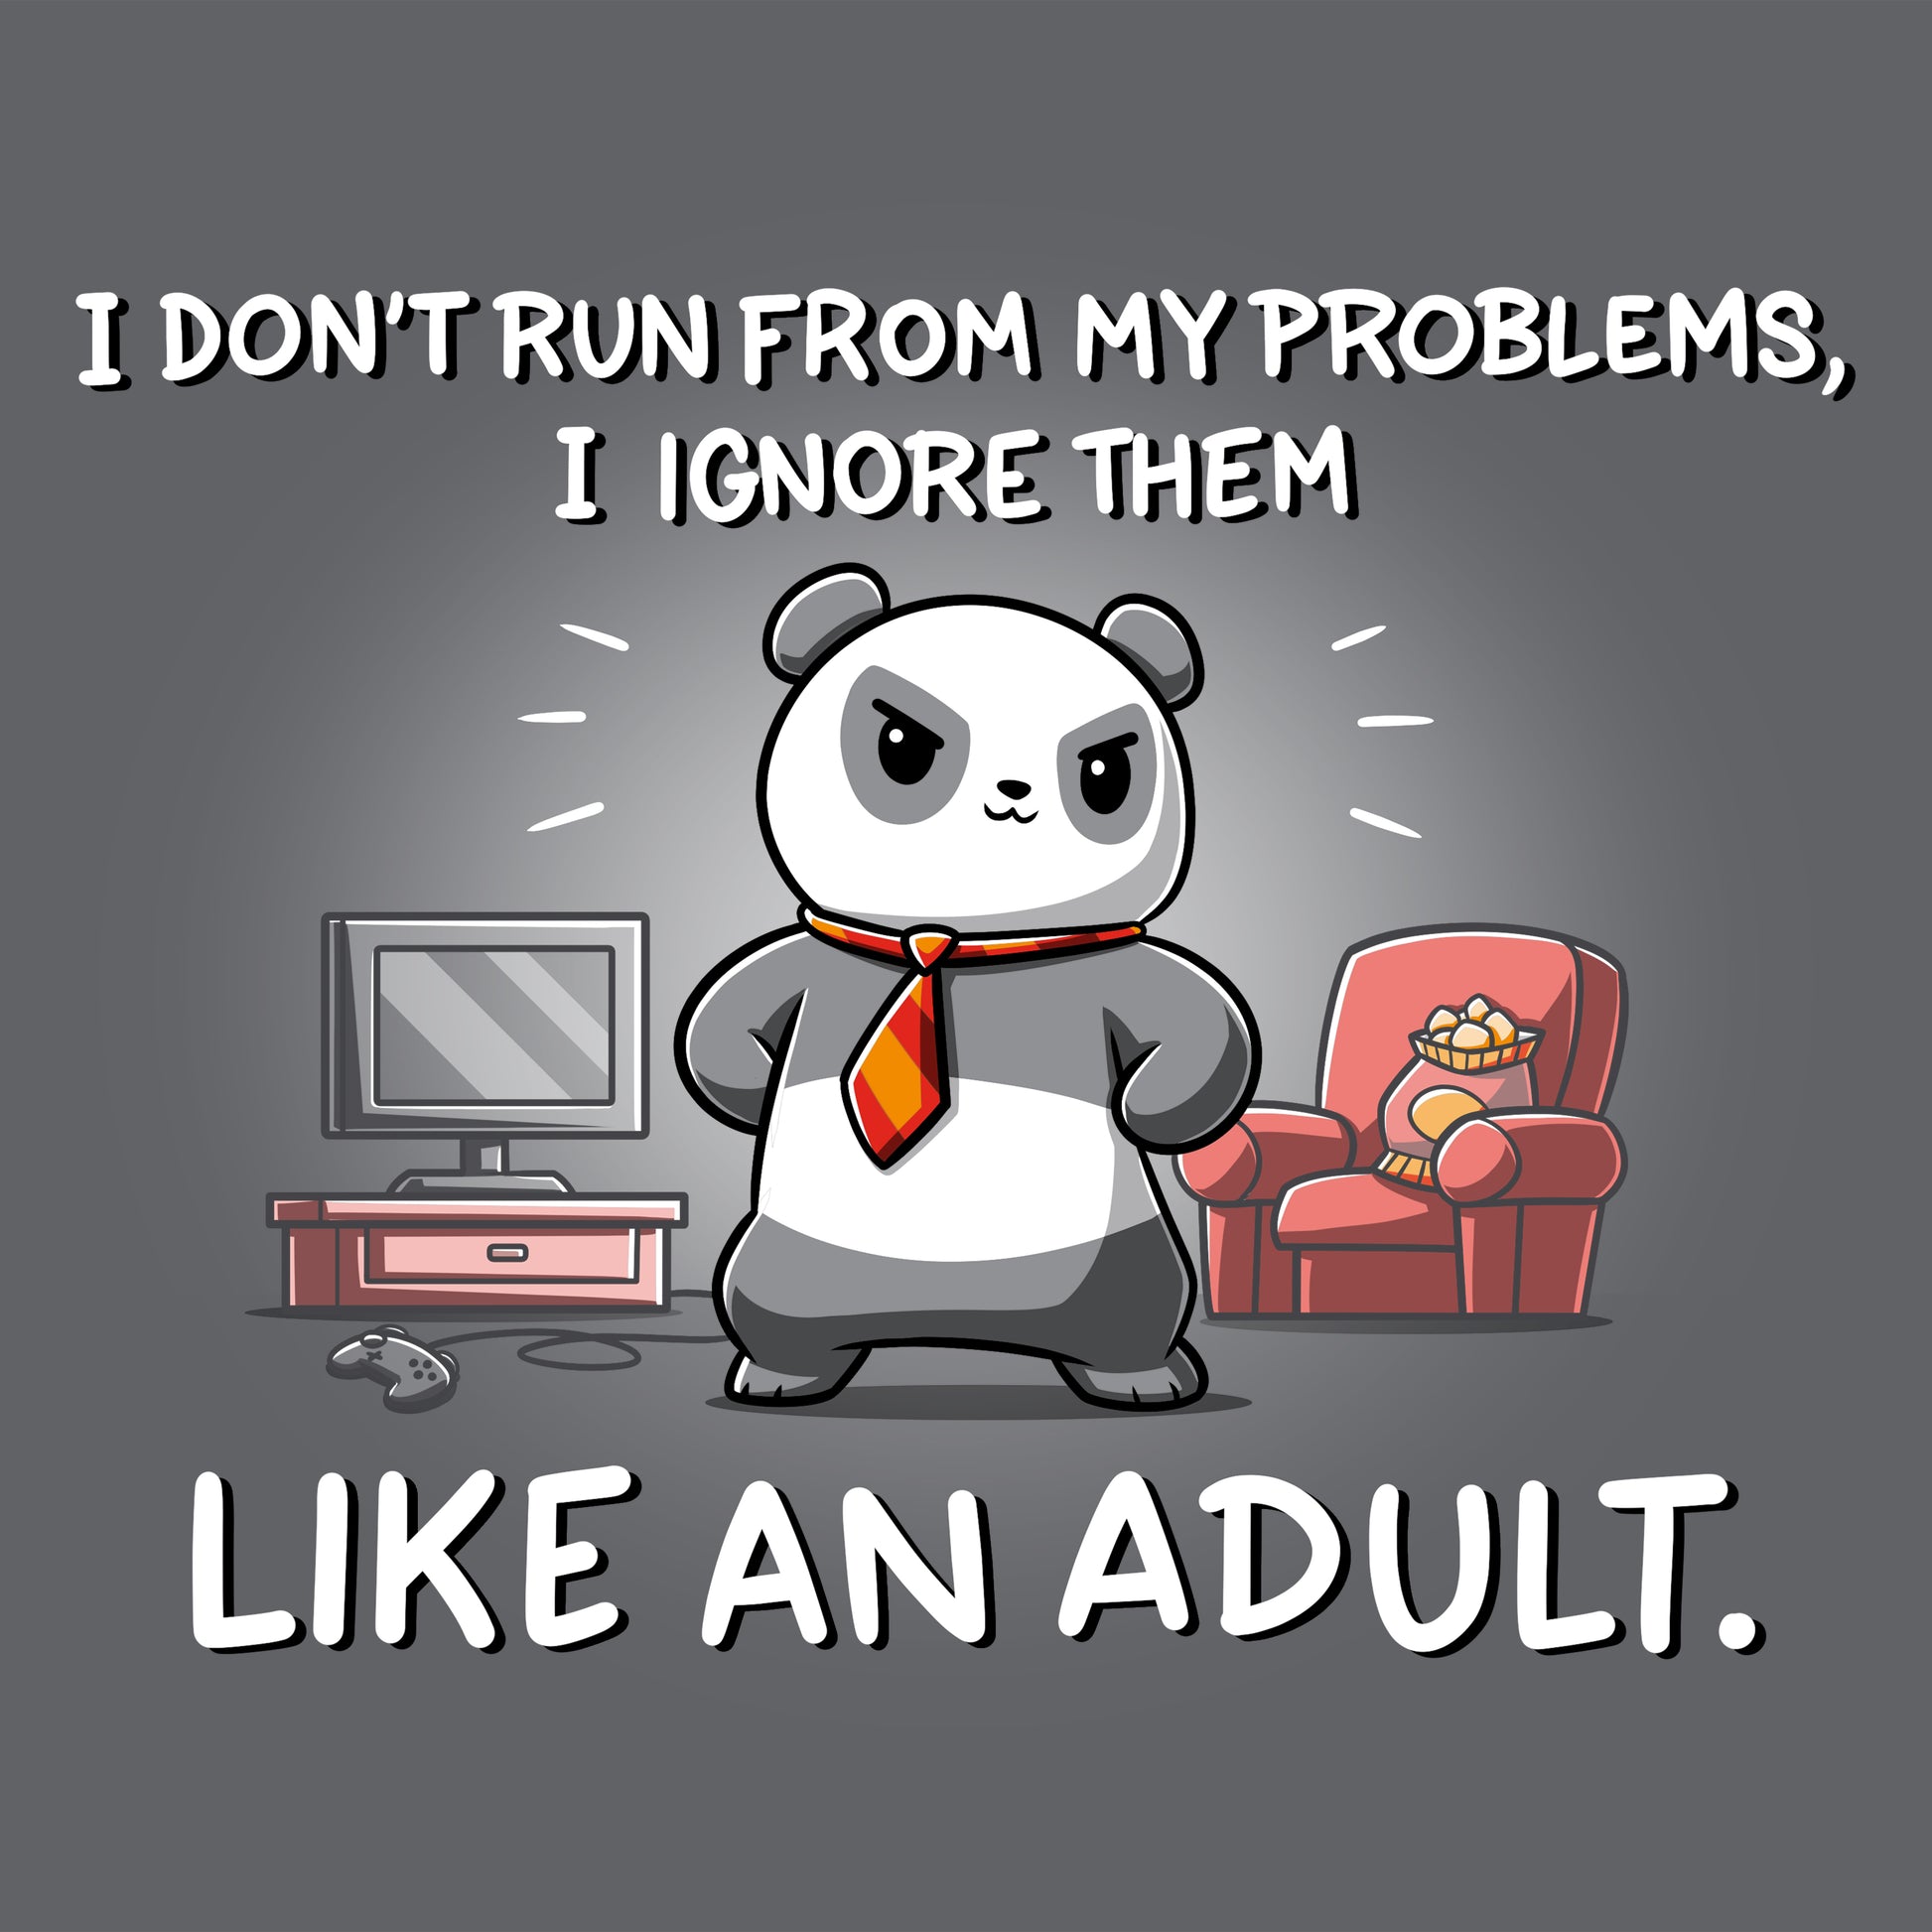 I don't TeeTurtle from my problems, I ignore them like an adult in a tee.